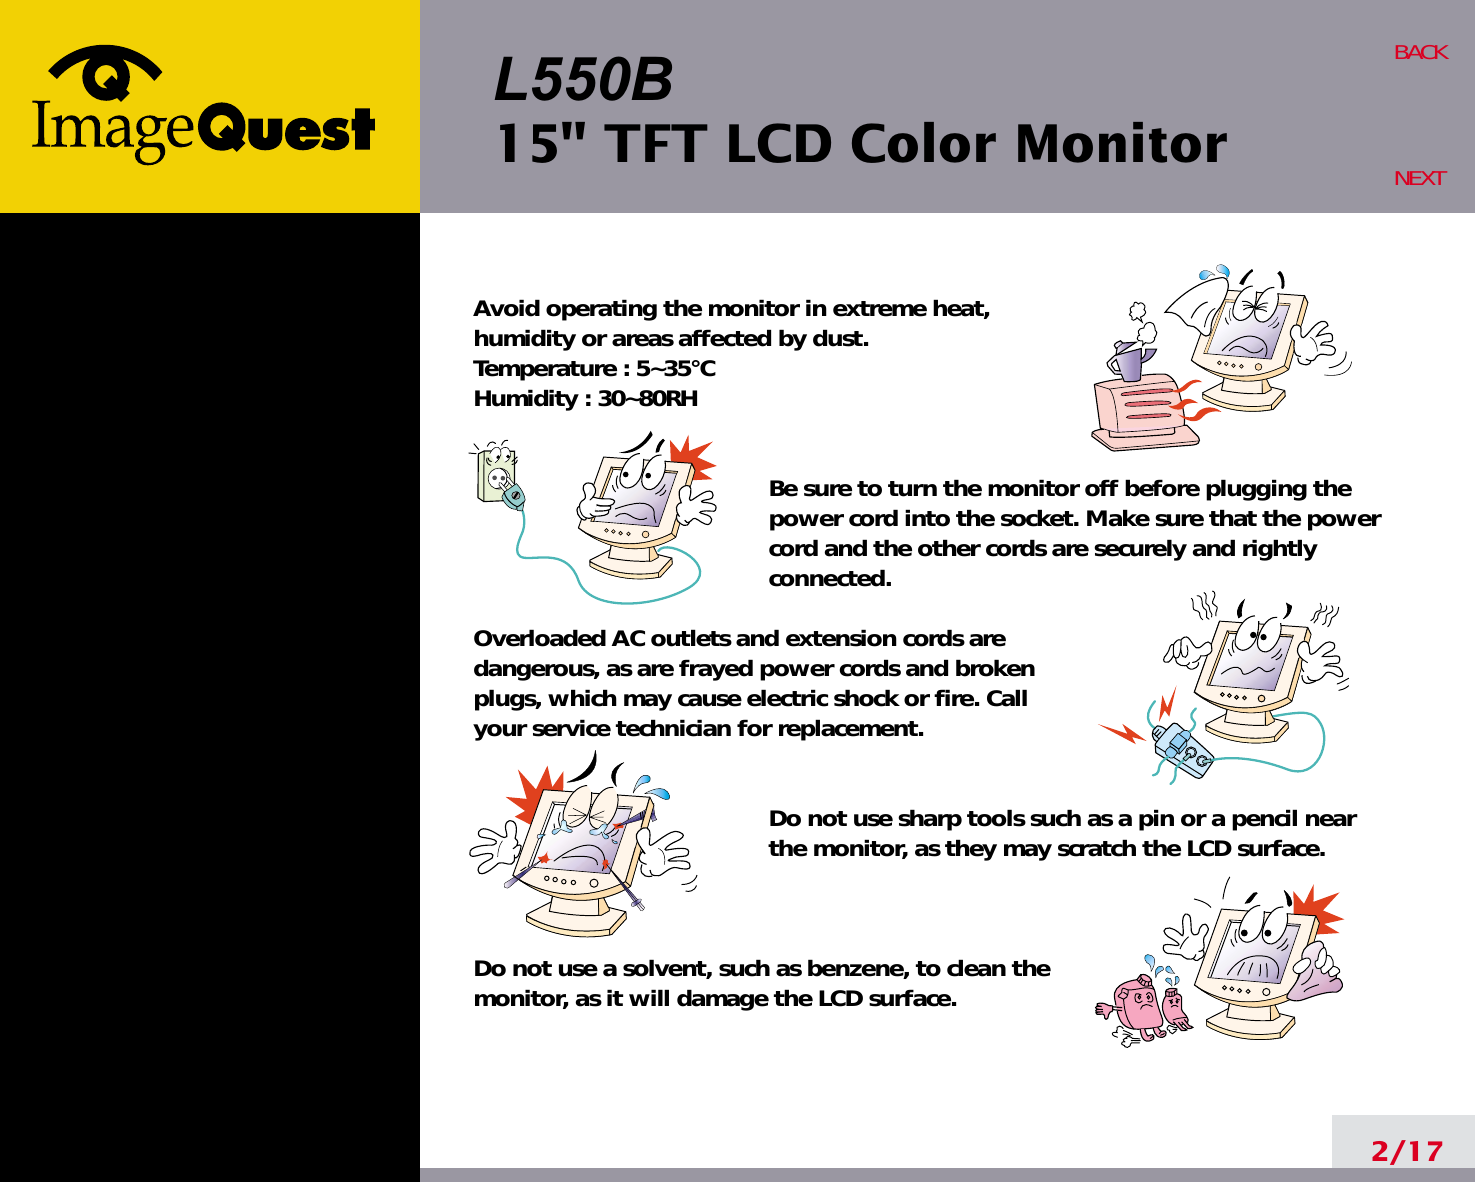 L550B15&quot; TFT LCD Color Monitor2/17BACKNEXTAvoid operating the monitor in extreme heat, humidity or areas affected by dust. Temperature : 5~35°CHumidity : 30~80RH Be sure to turn the monitor off before plugging thepower cord into the socket. Make sure that the powercord and the other cords are securely and rightlyconnected.Overloaded AC outlets and extension cords are dangerous, as are frayed power cords and broken plugs, which may cause electric shock or fire. Call your service technician for replacement.Do not use sharp tools such as a pin or a pencil near the monitor, as they may scratch the LCD surface.Do not use a solvent, such as benzene, to clean the monitor, as it will damage the LCD surface.